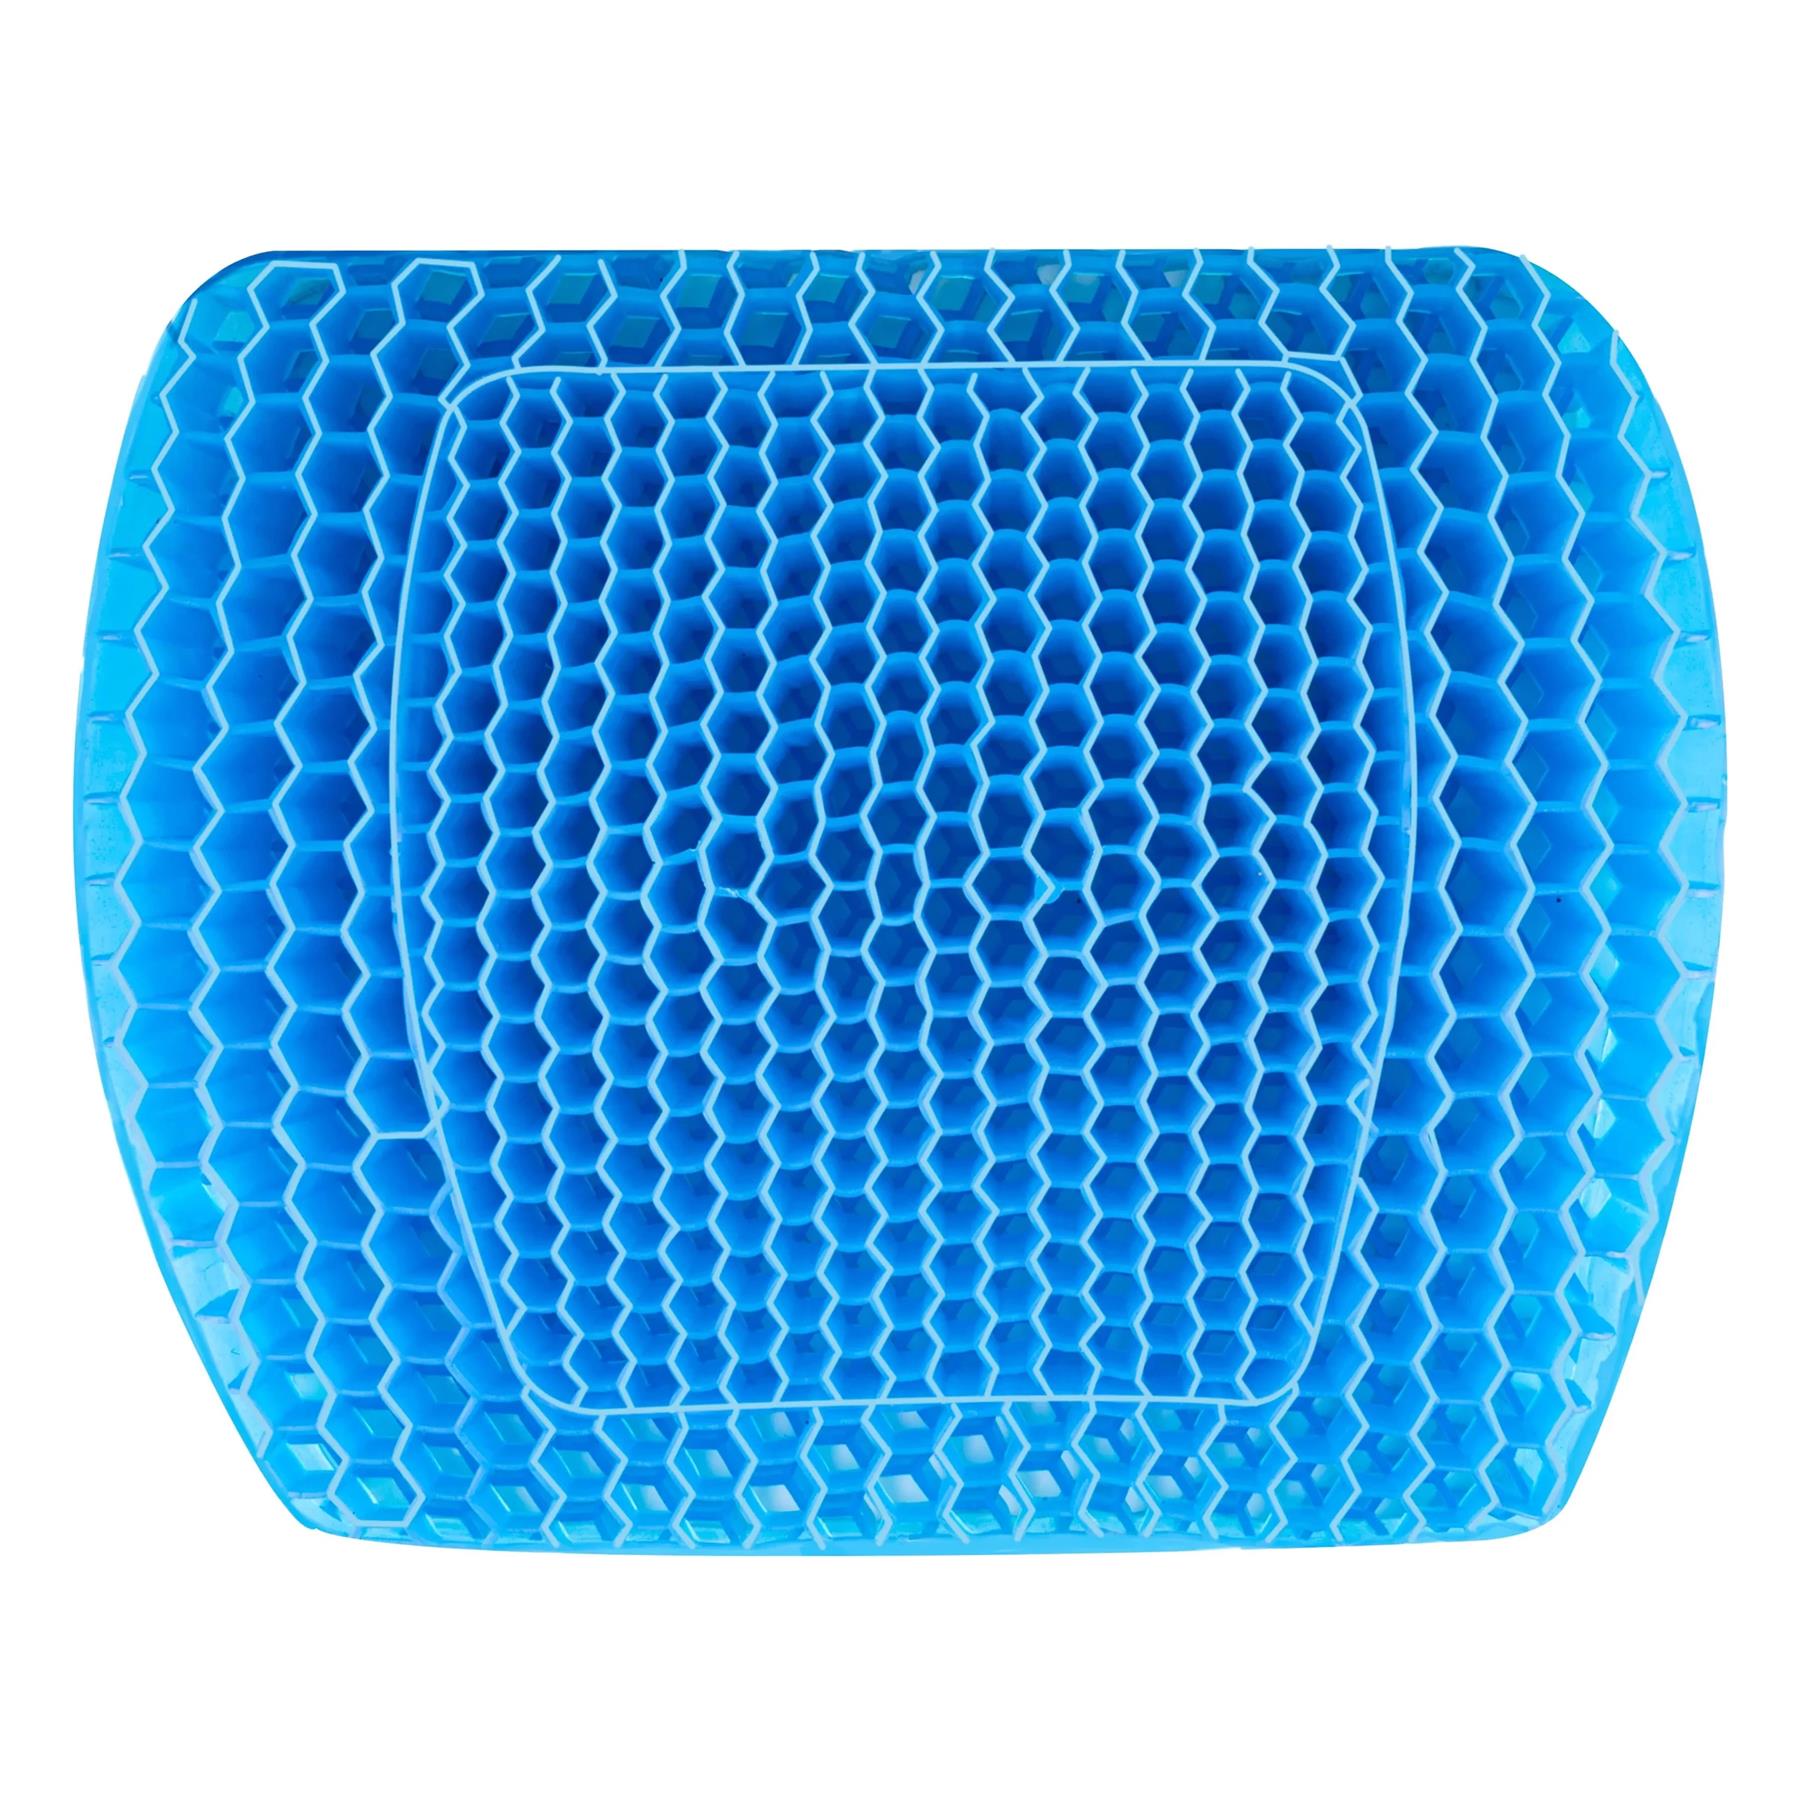 Orthopaedic Gel Seat Cushion by GEEZY - The Magic Toy Shop